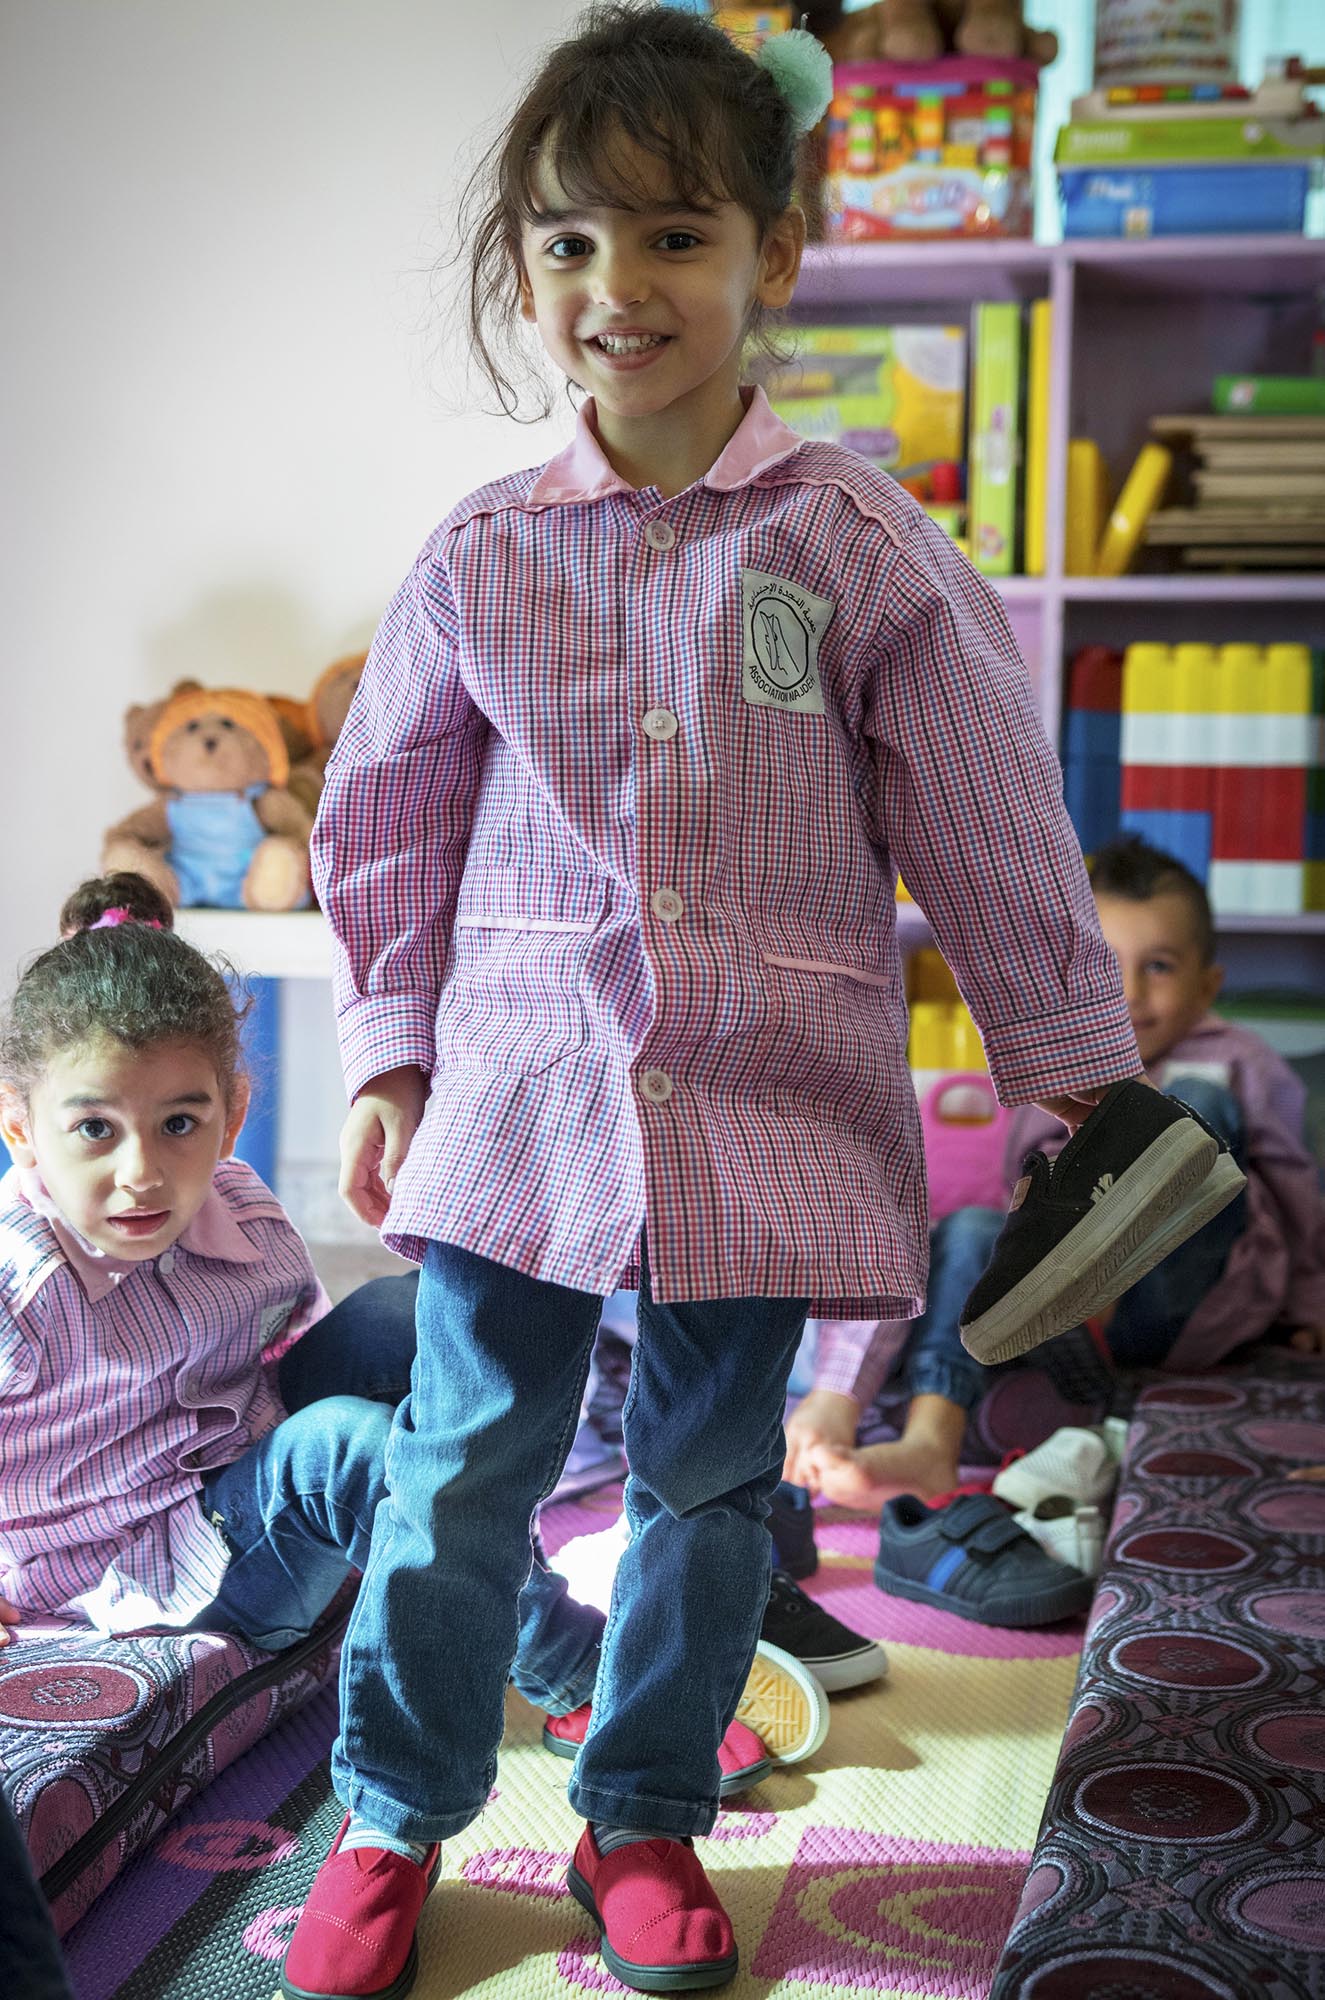 Preschoolers in Beddawi Camp in Lebanon picks up brand new TOMS shoes.